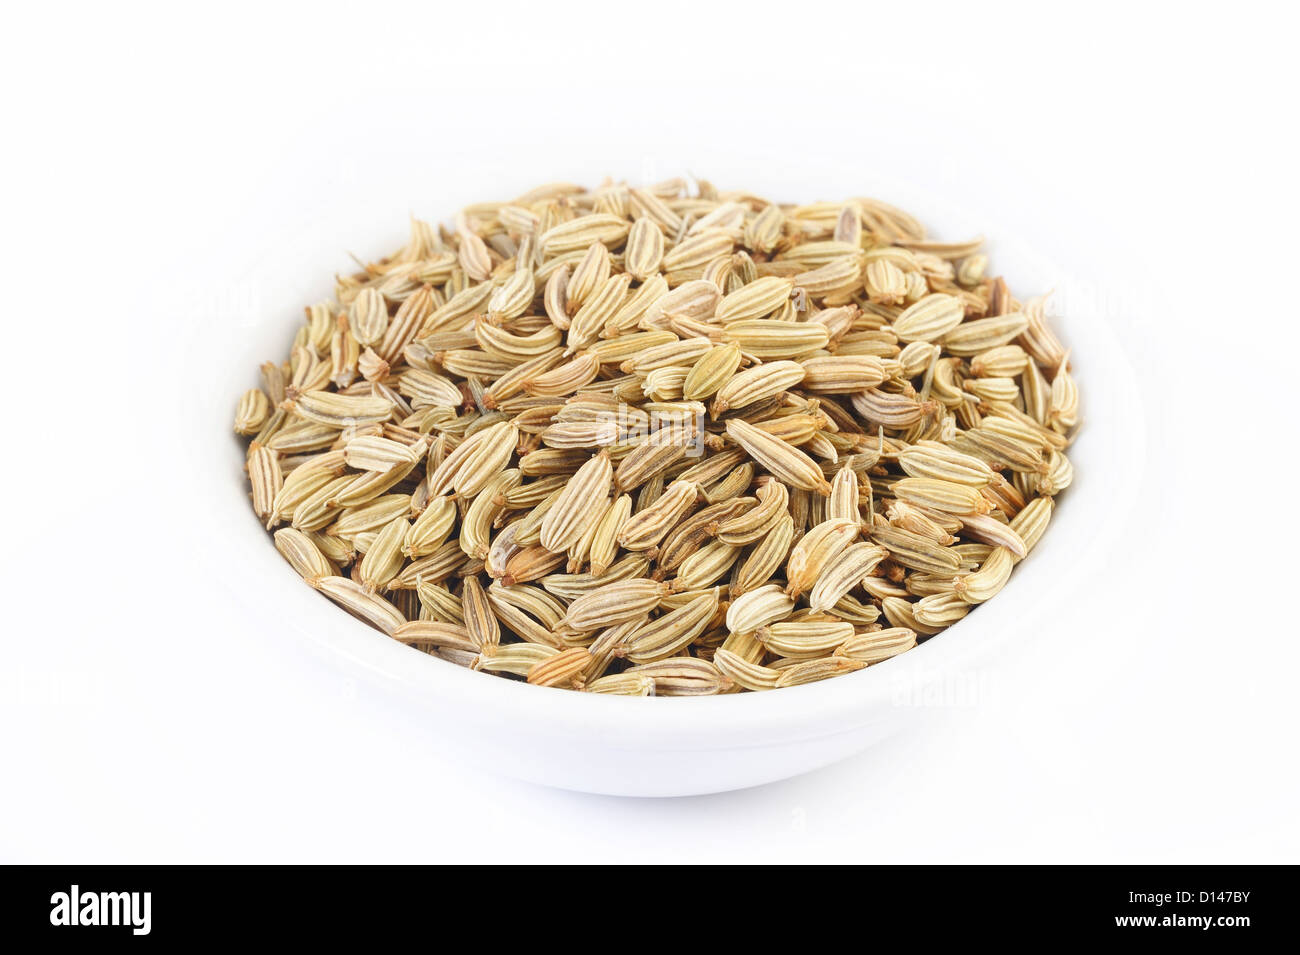 Fennel seeds in white bowl Stock Photo